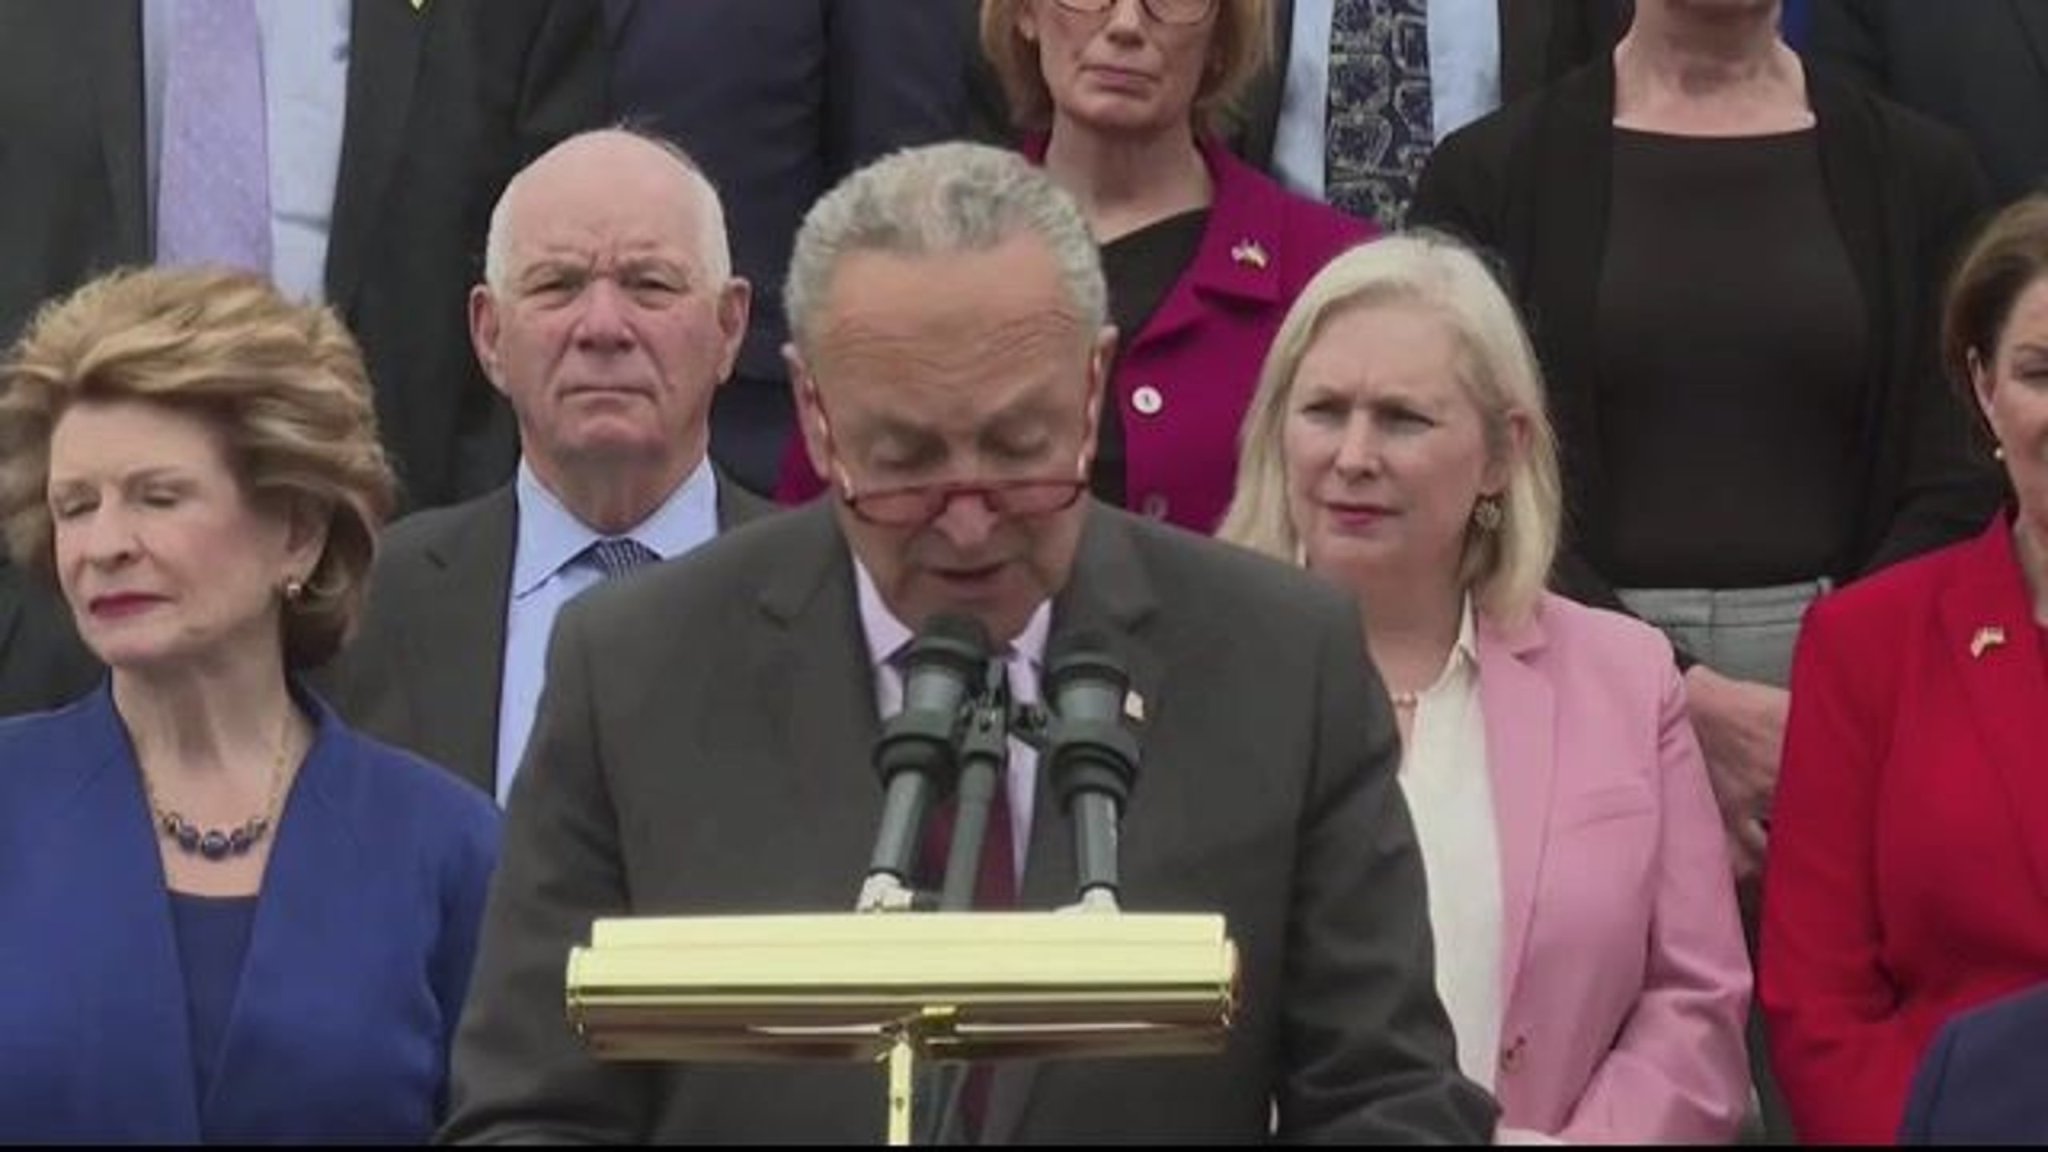 Senate Majority Leader Schumer announces that the Senate will hold a vote on codifying a woman’s right to abortion.